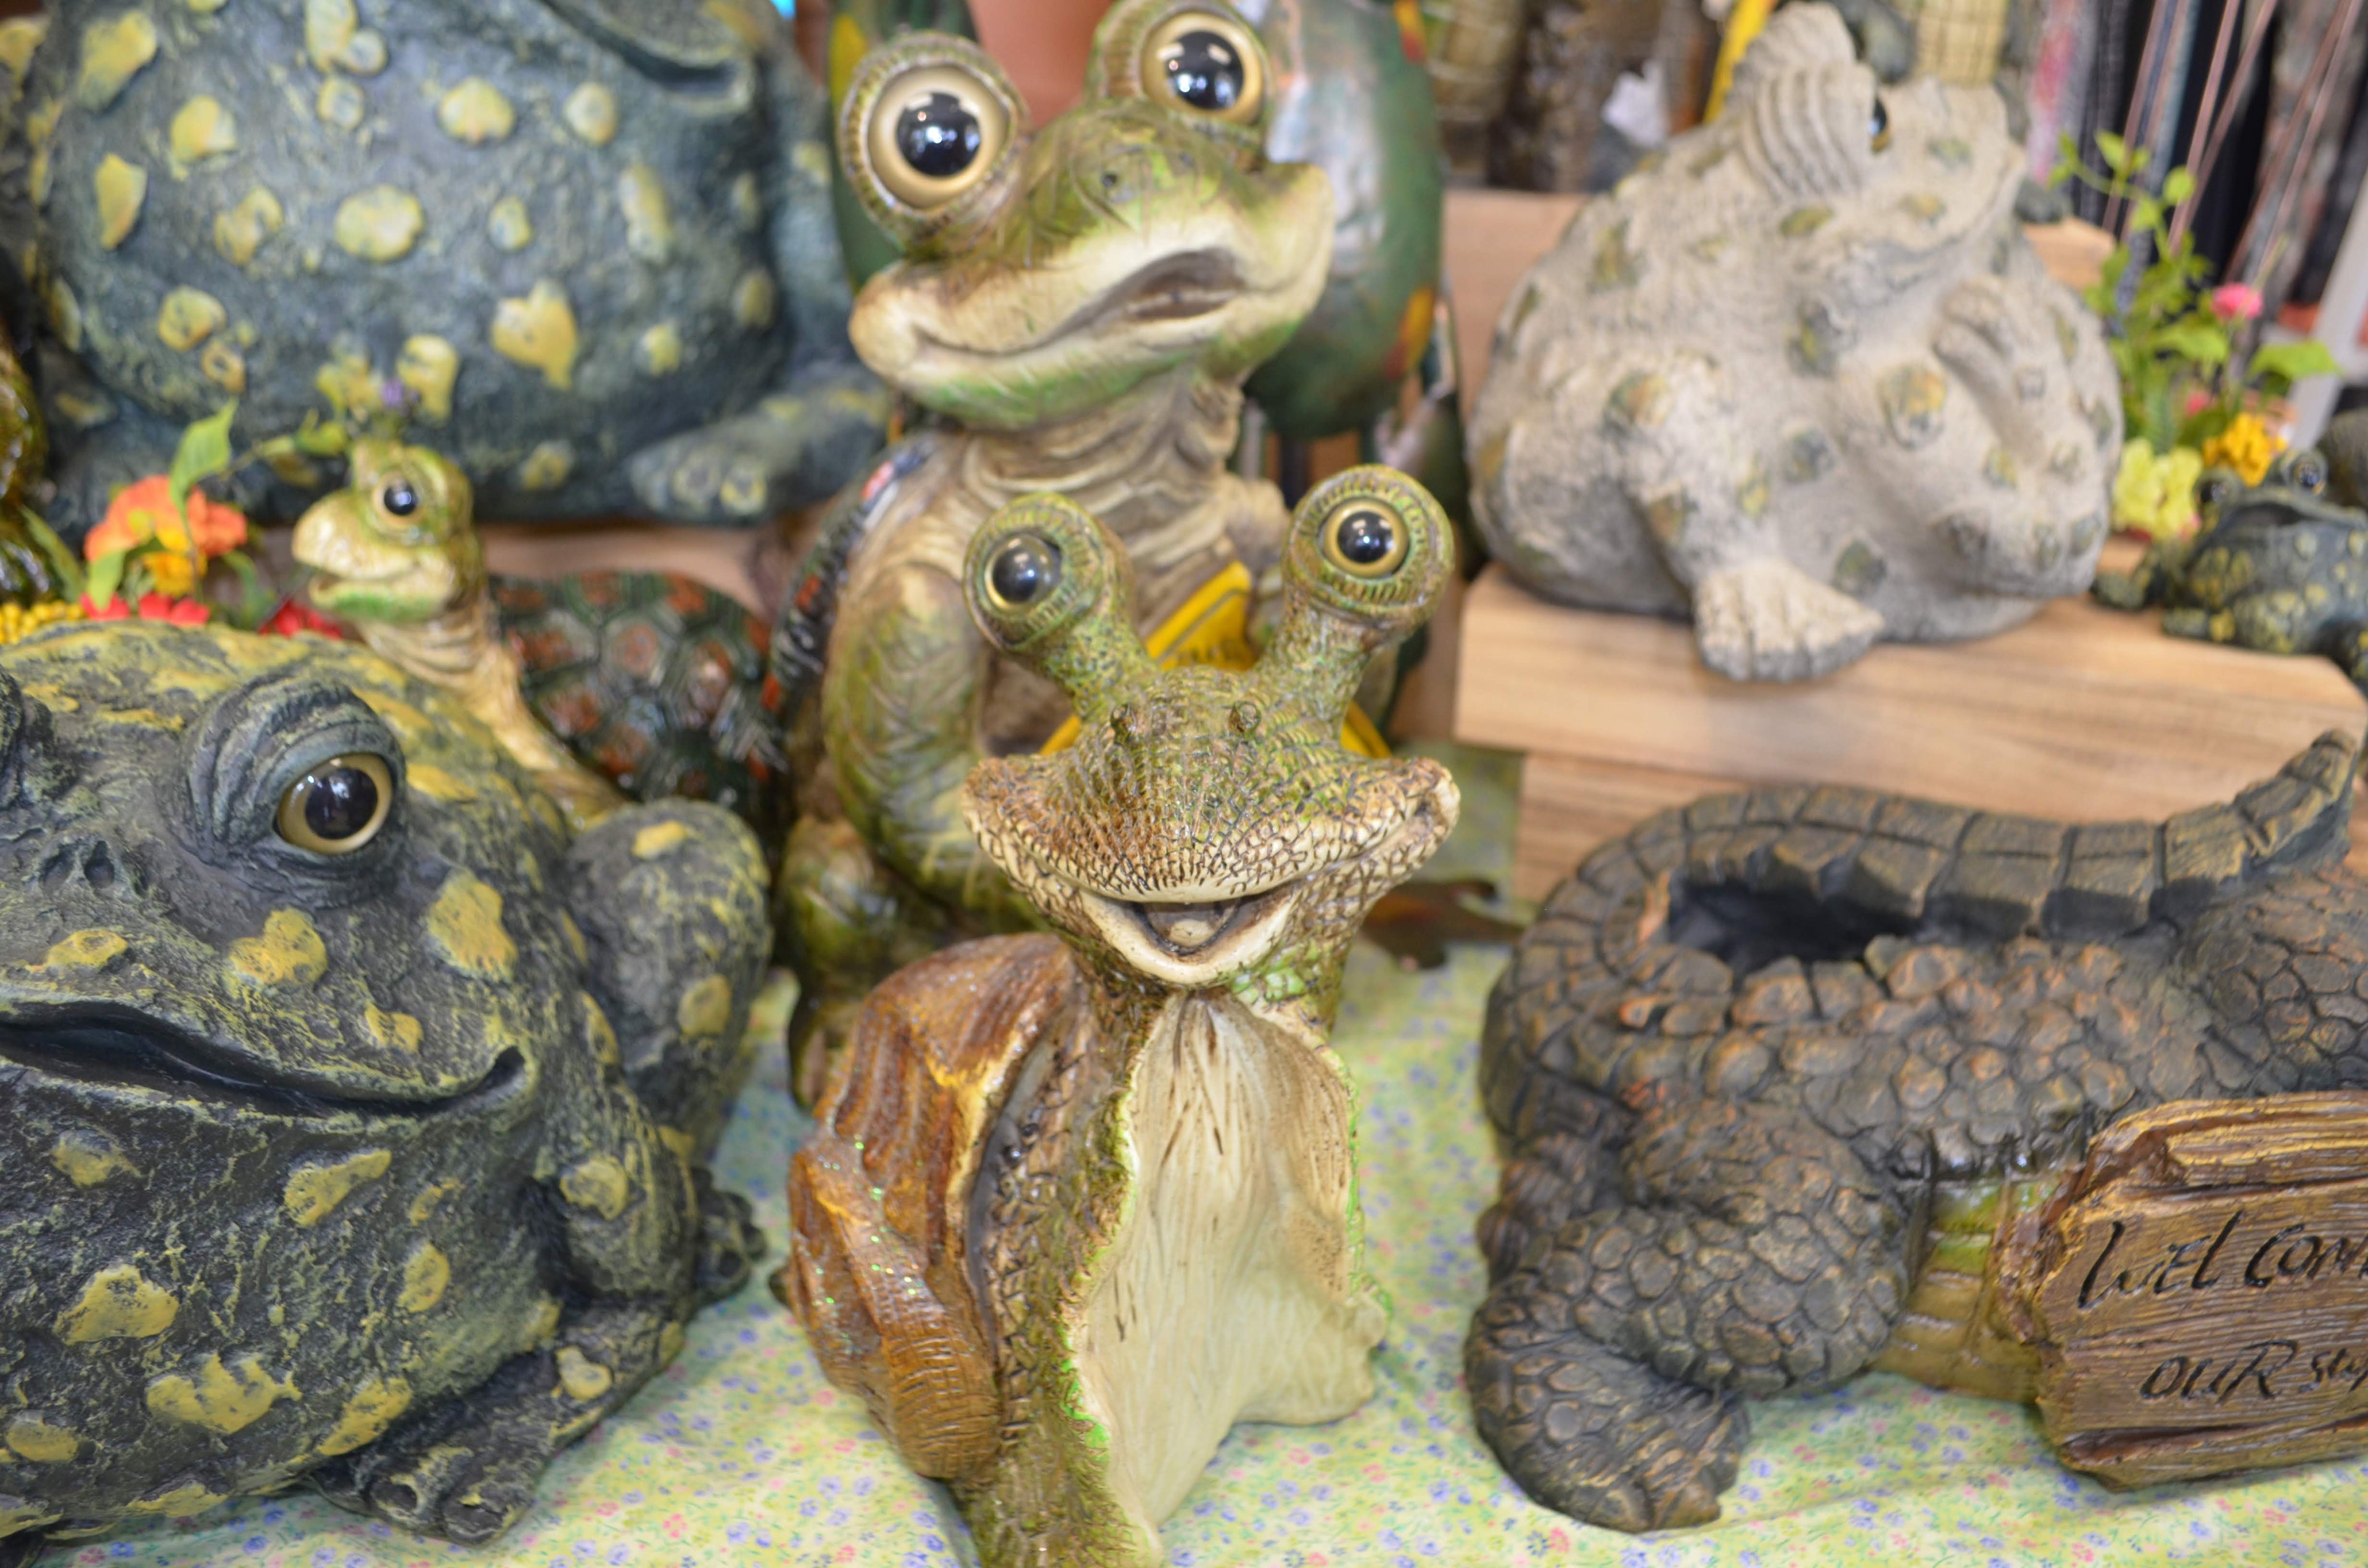 Adorn your garden with charming frog and turtle figurines, adding a touch of whimsical sophistication to your outdoor space. These fun and colorful garden accents are perfect for gardening and landscaping enthusiasts in Florida, USA.